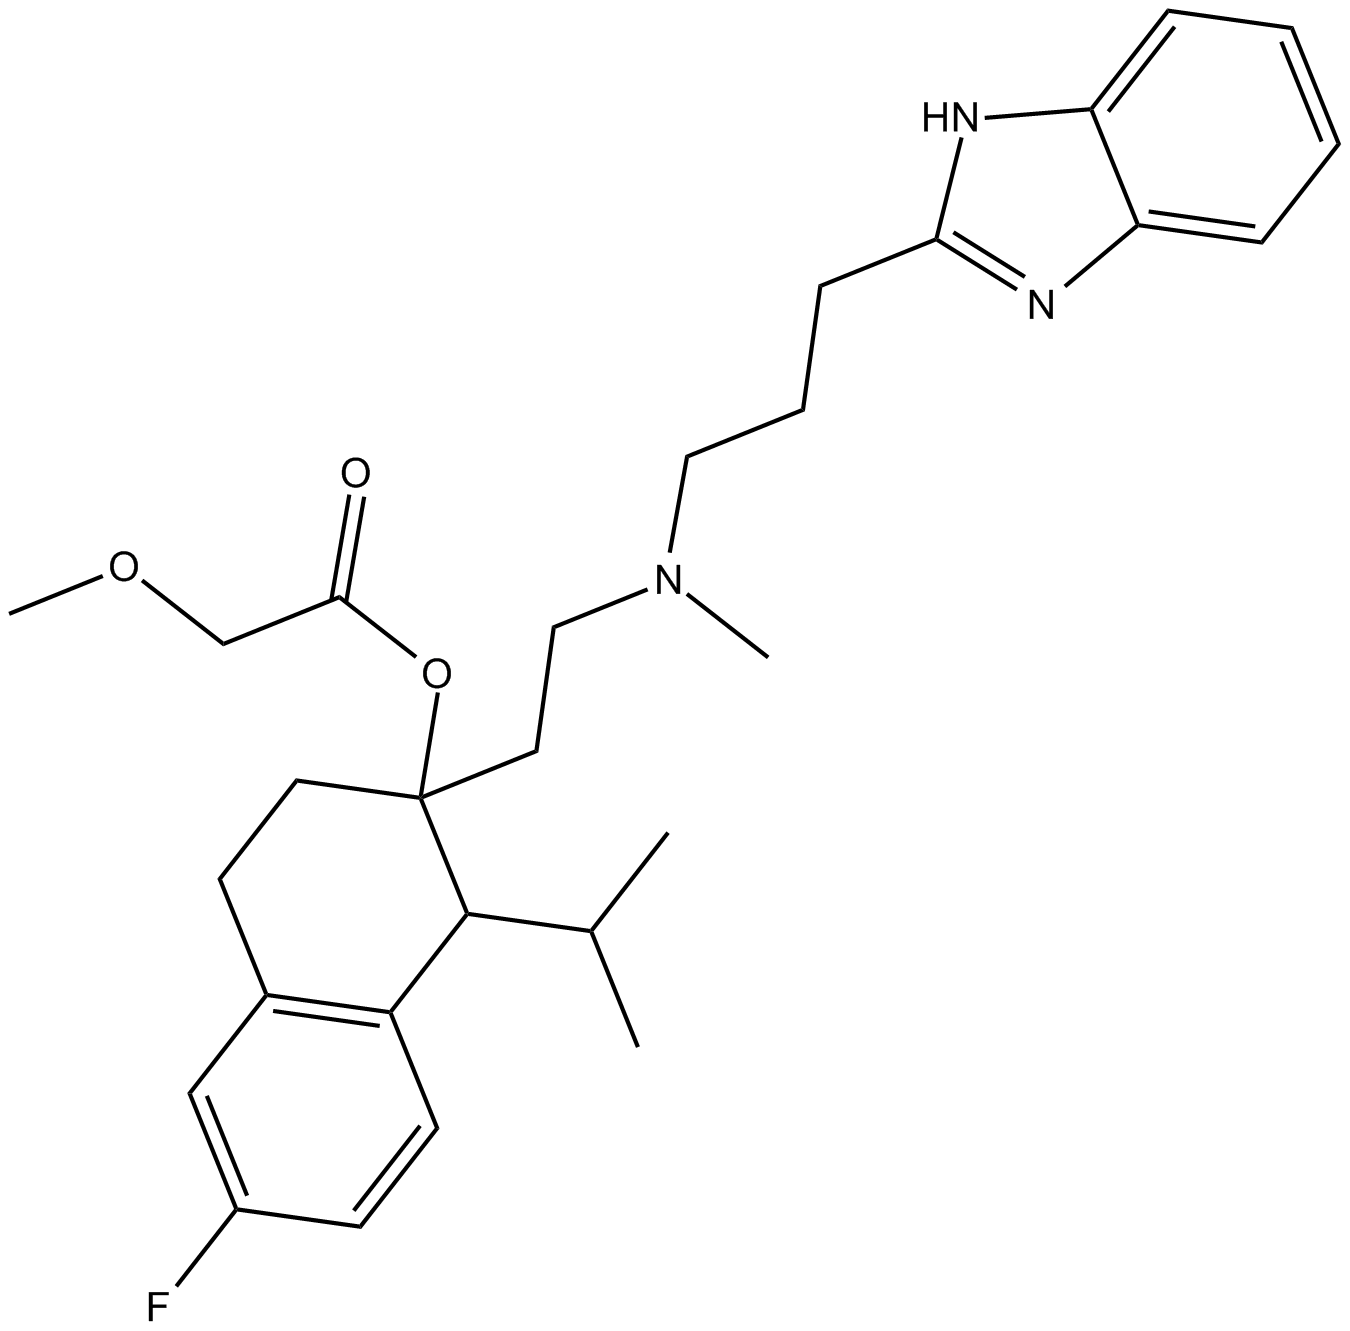 Mibefradil  Chemical Structure